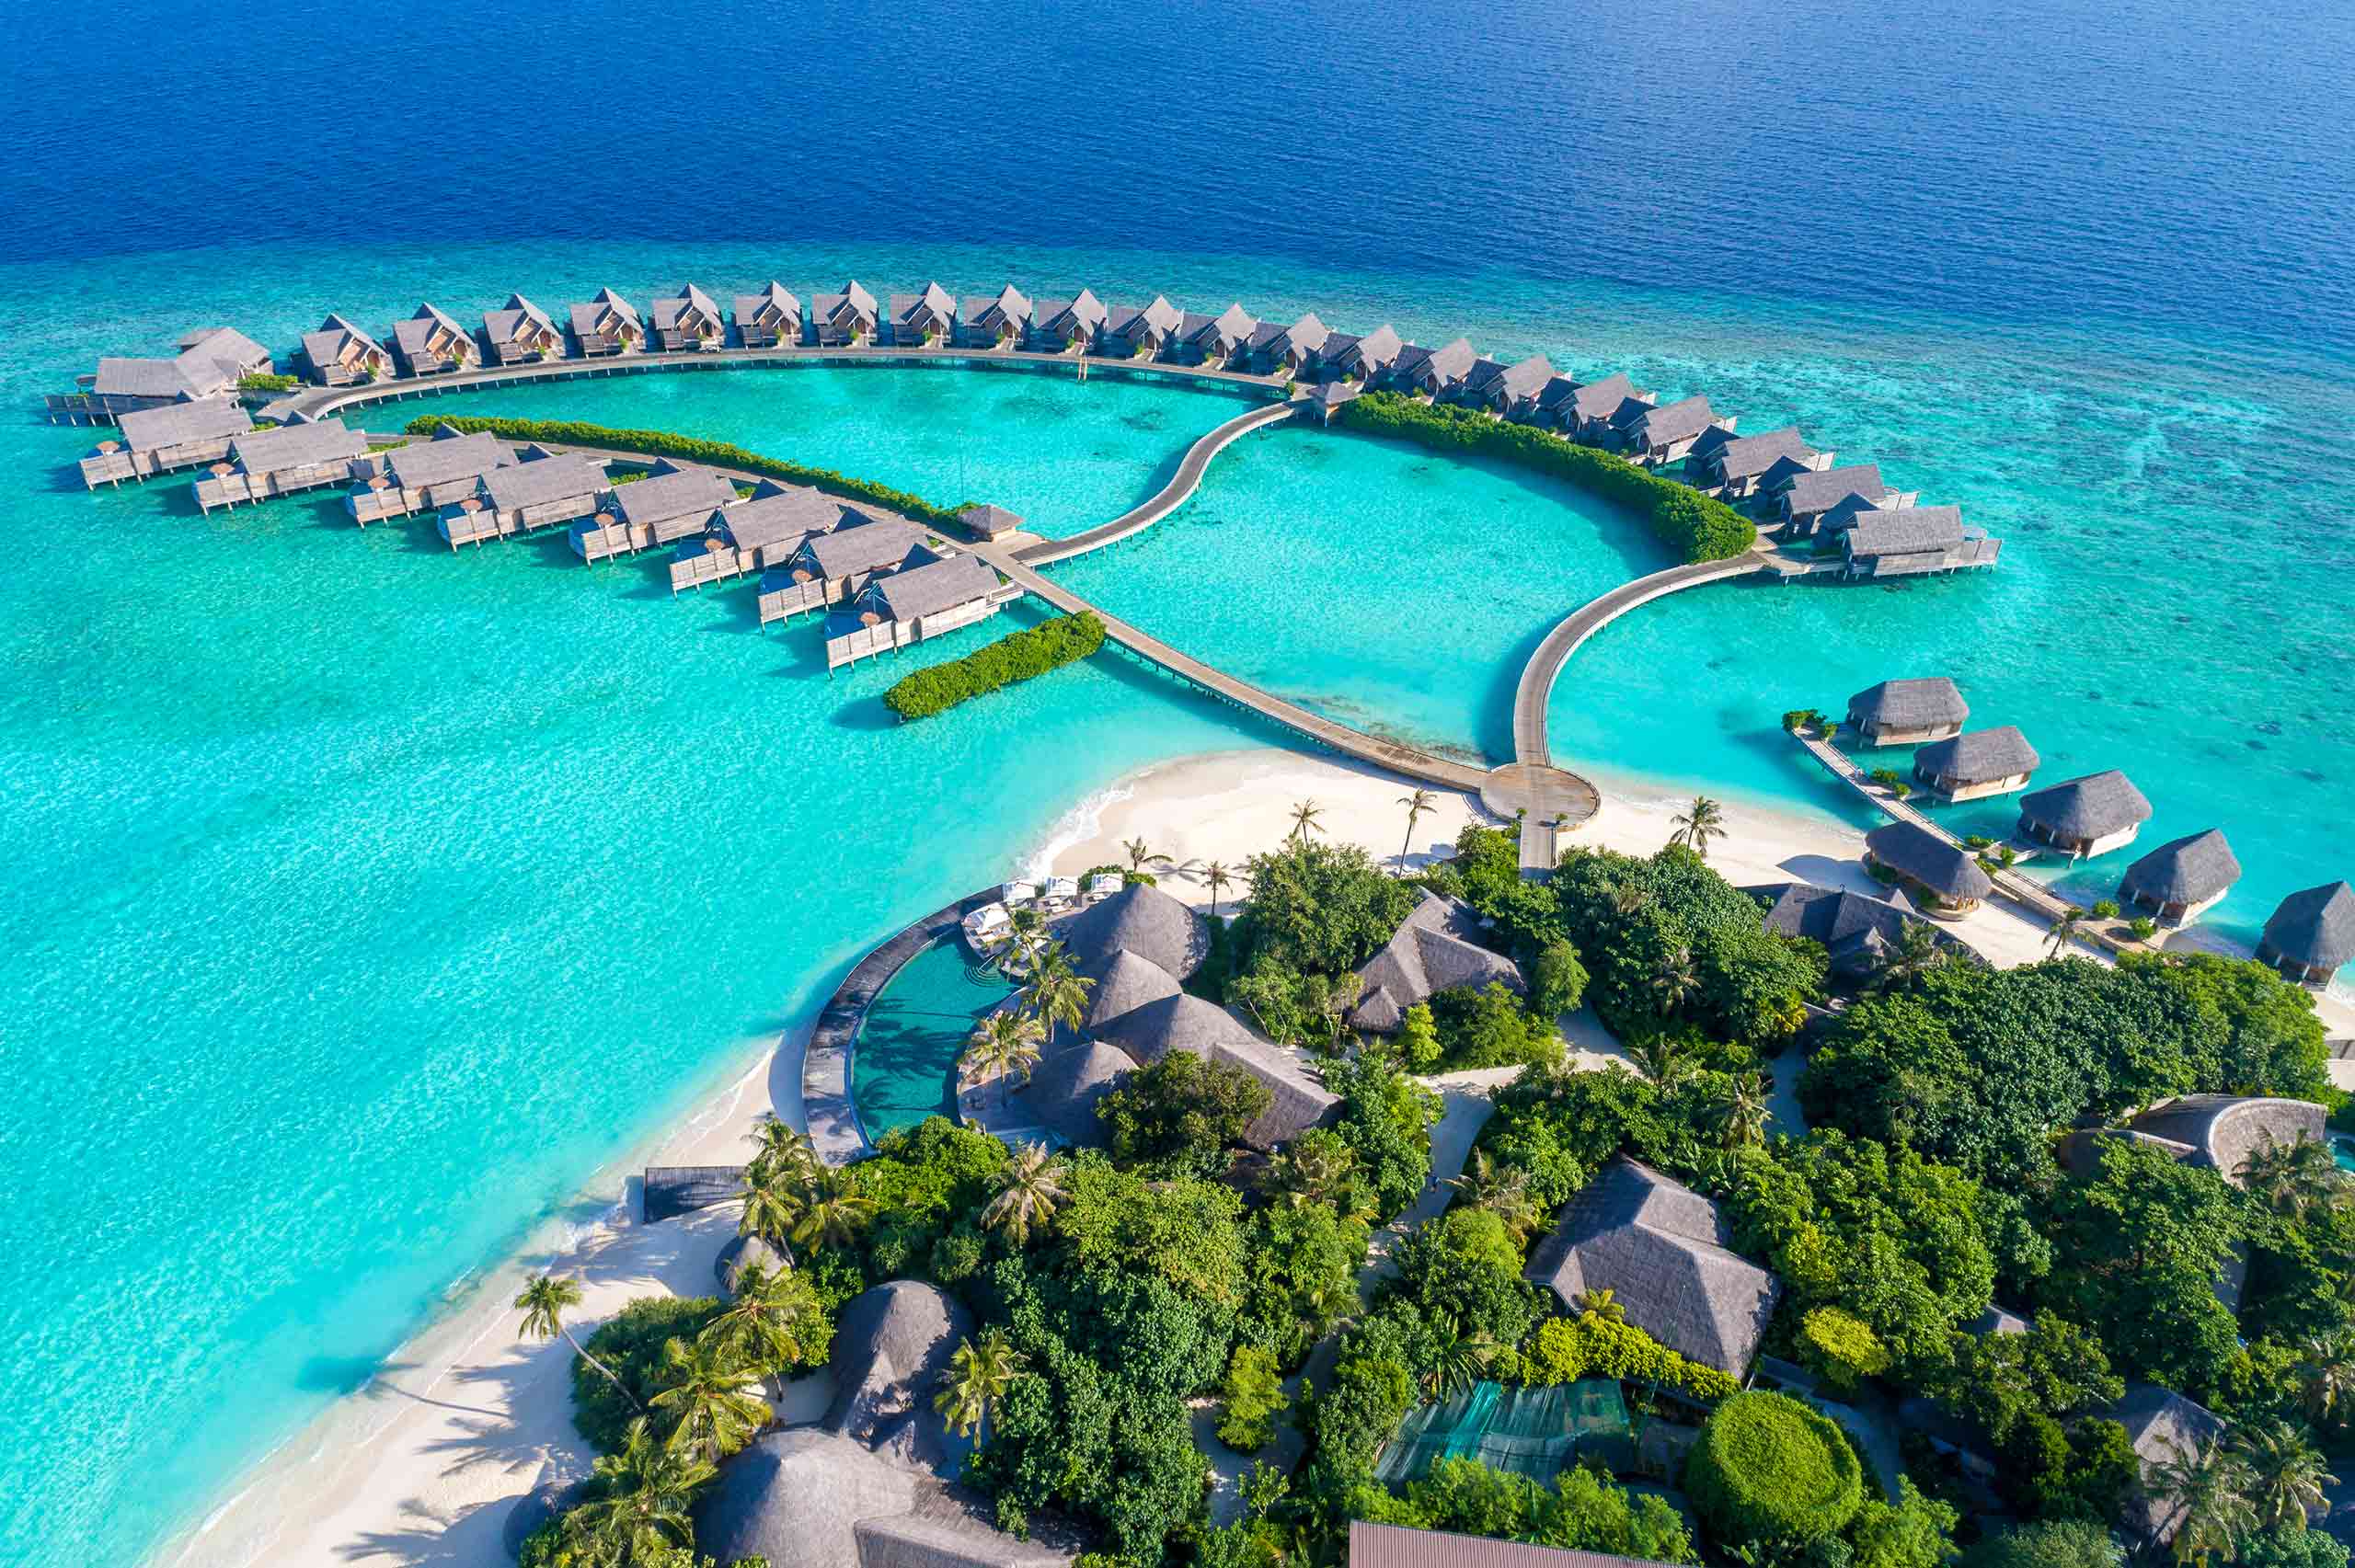 Aerial view of the overwater villas at Milaidhoo, The Maldives